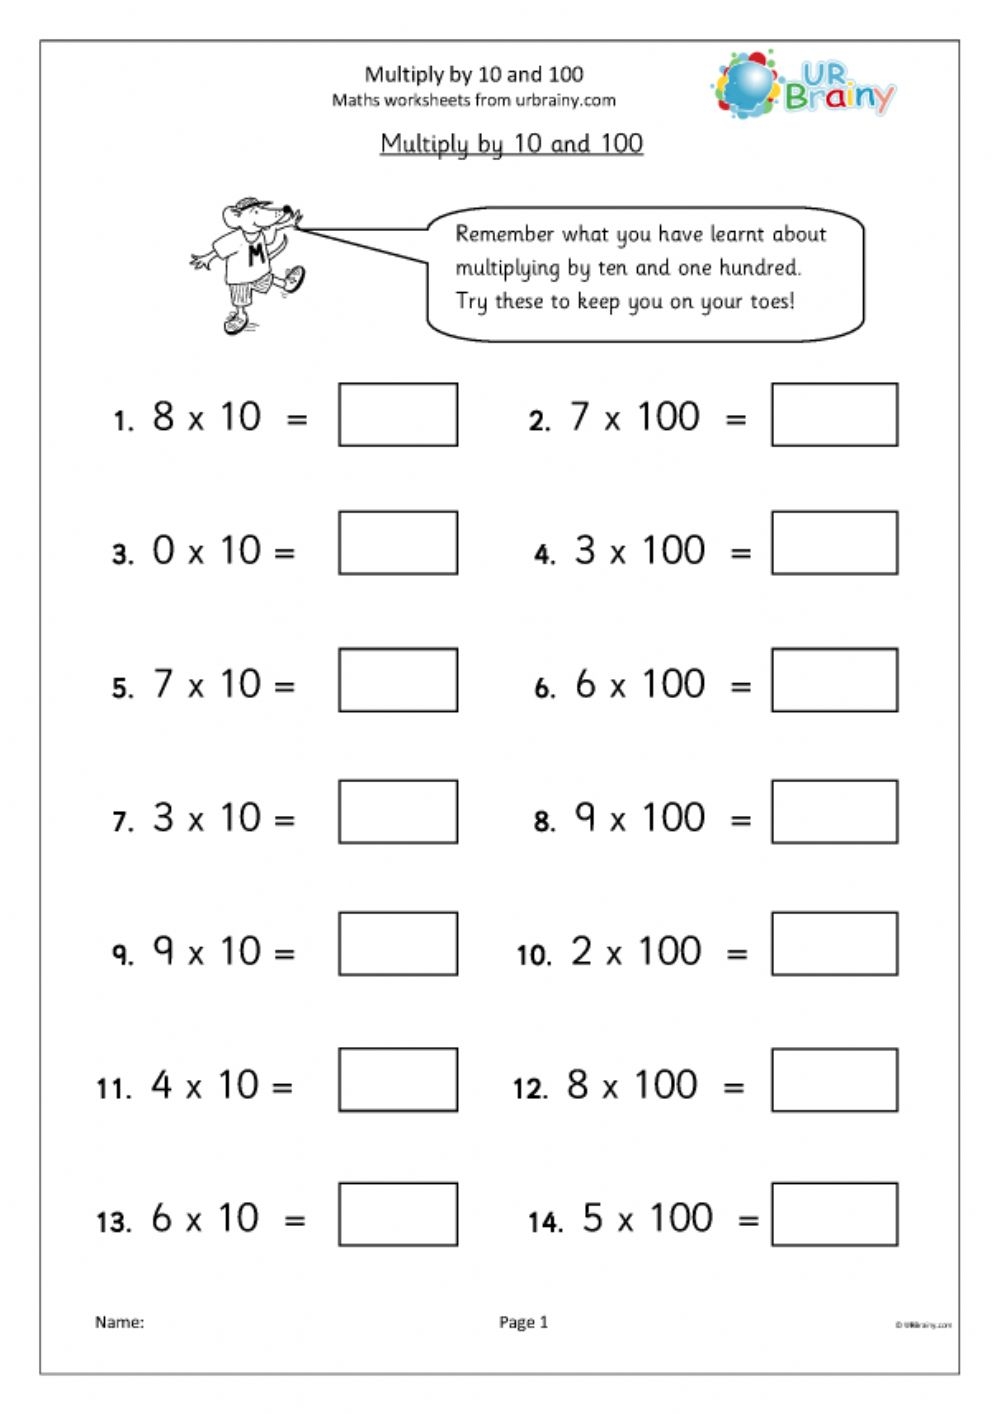 Multiplication Worksheets By 10